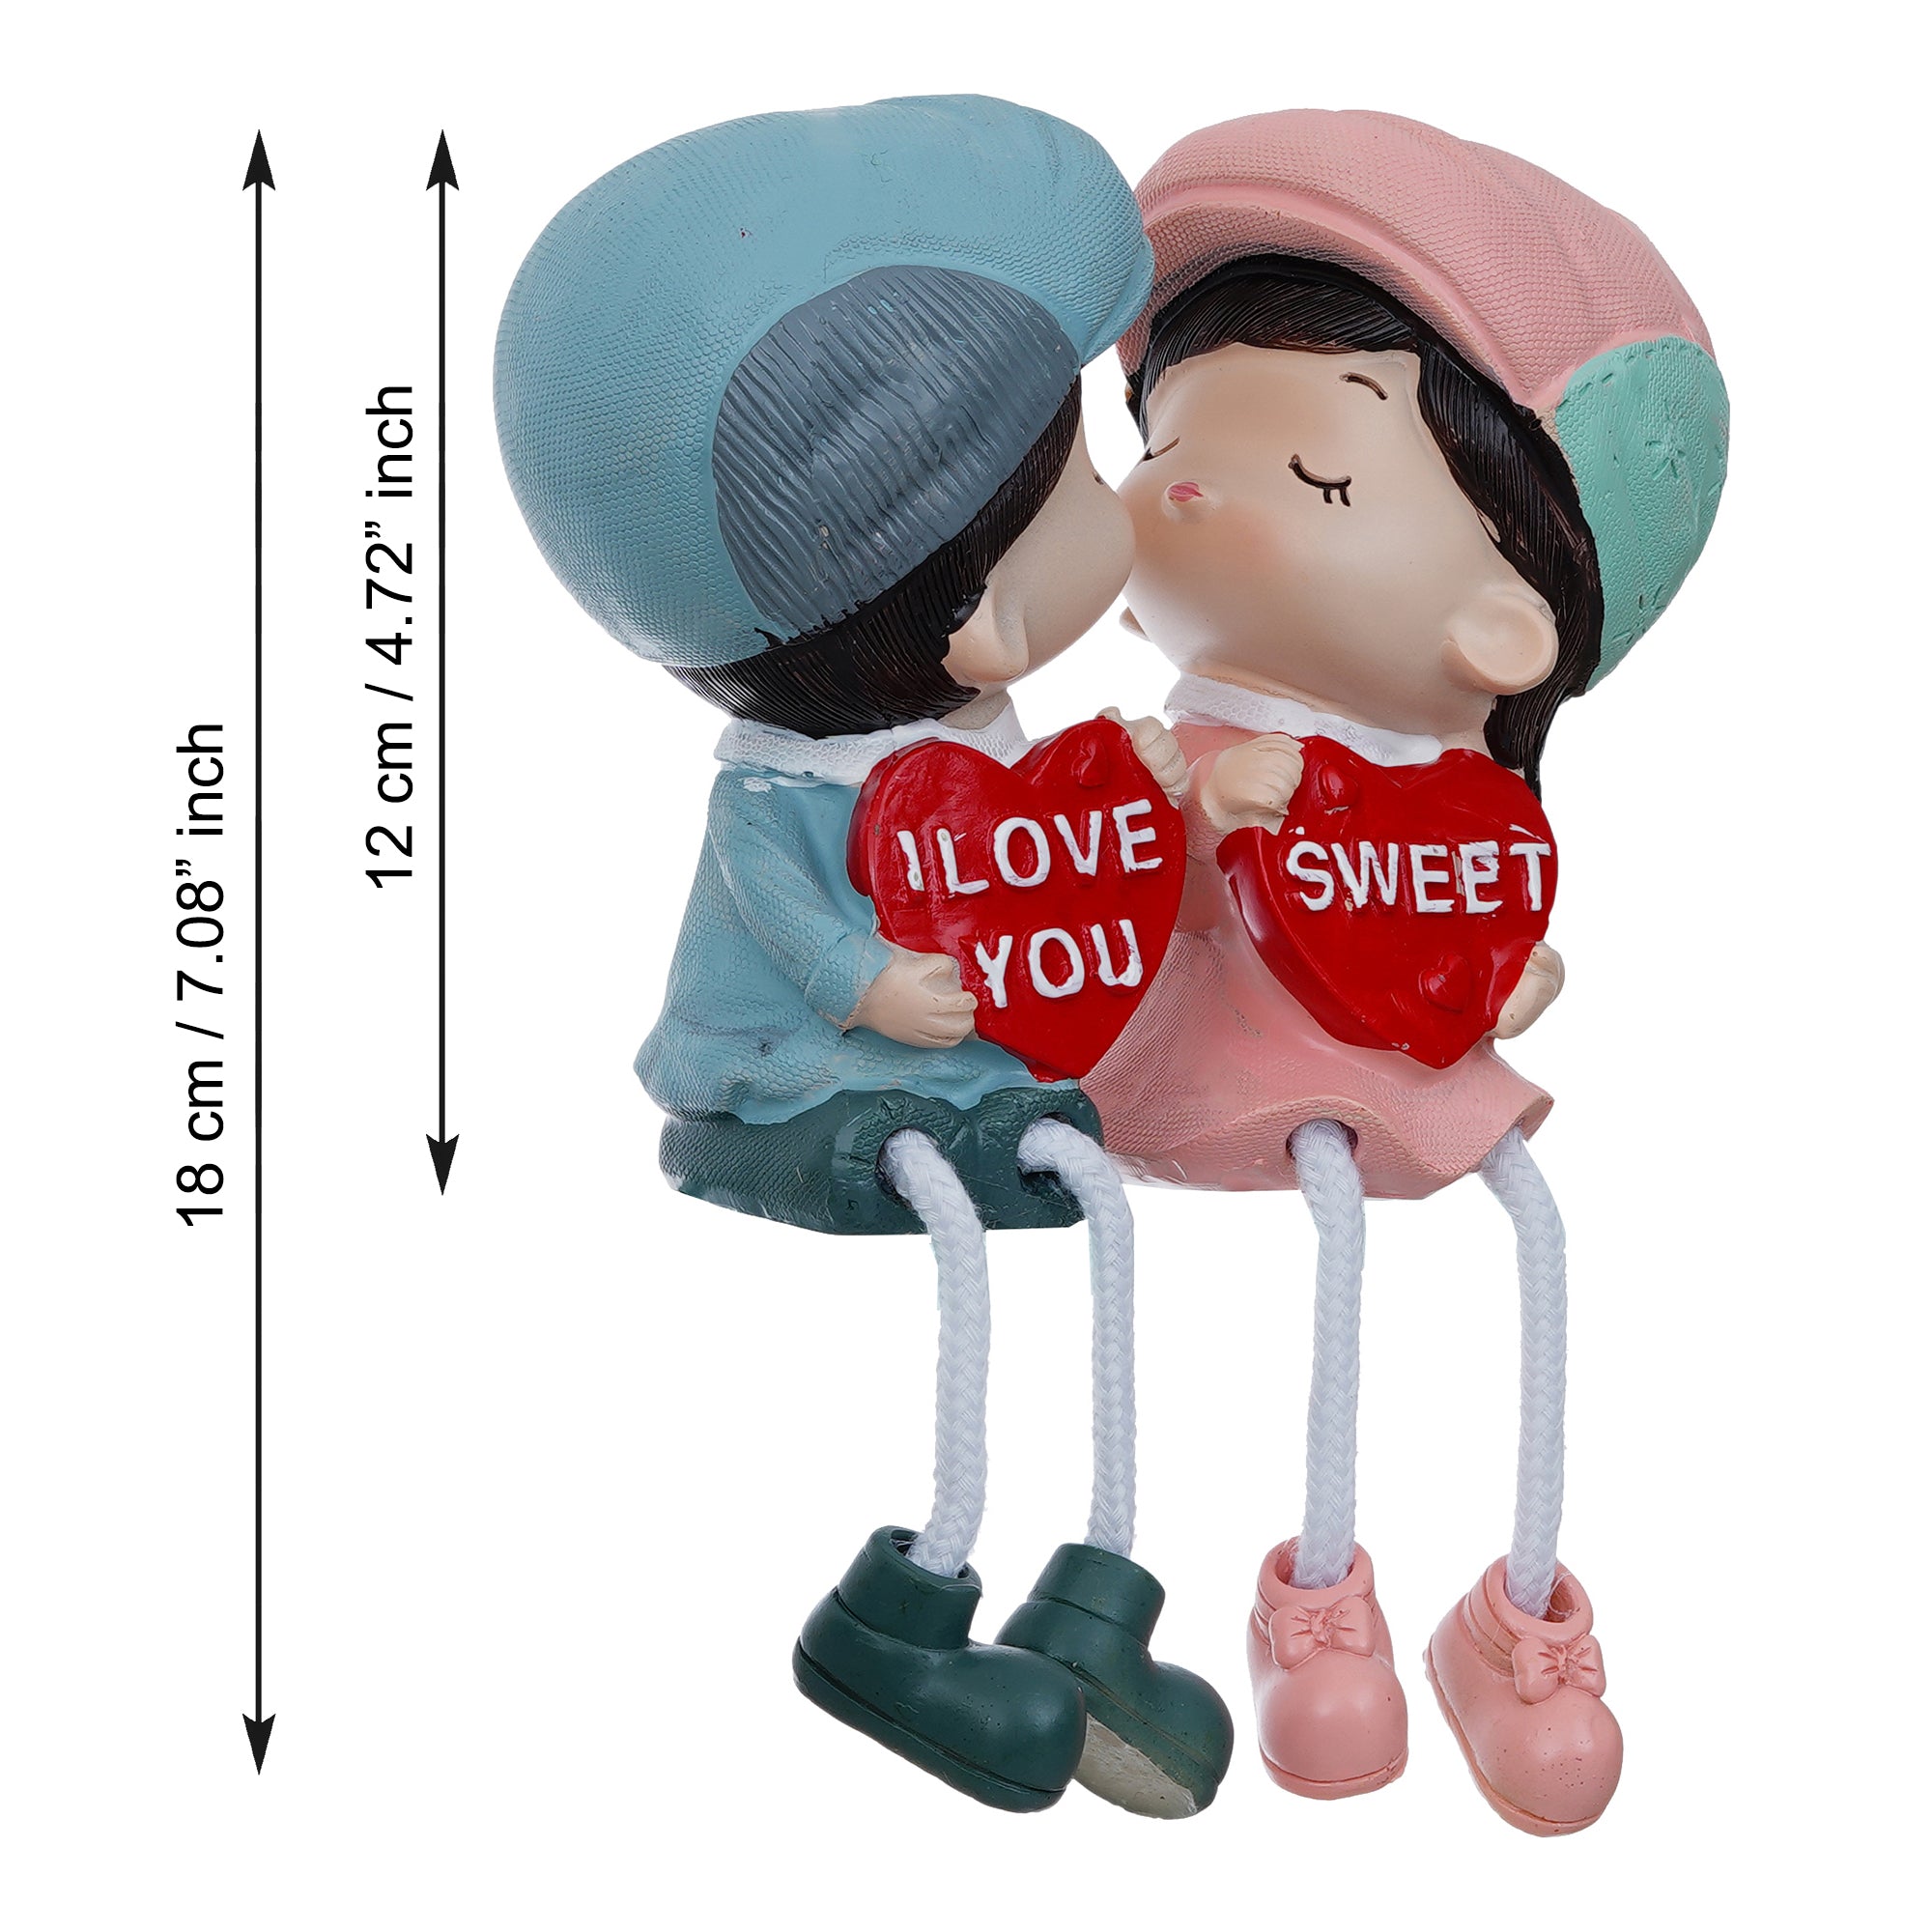 Valentine Combo of "My Heart Beats Only For You" Wooden Showpiece With Stand, Colorful Girl and Boy "Sweet I Love You" Kissing Figurine 4